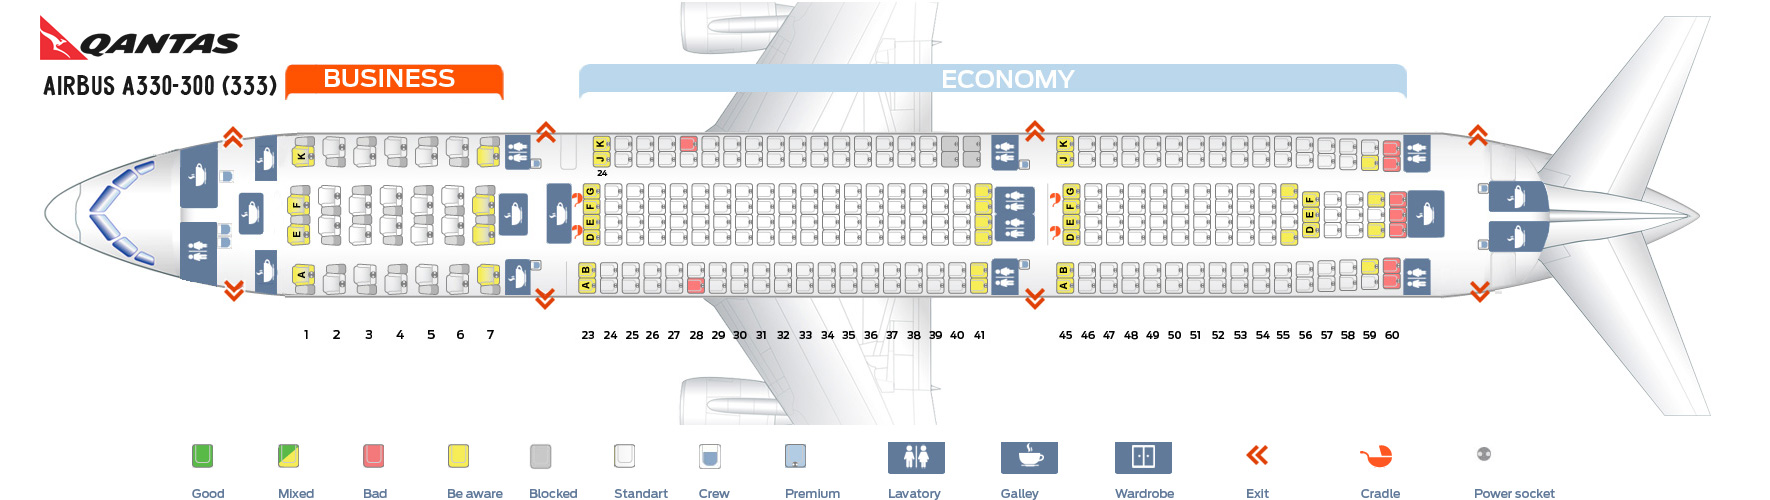 Seat Map Airbus A330 300 Qantas Airways Best Seats In The Plane